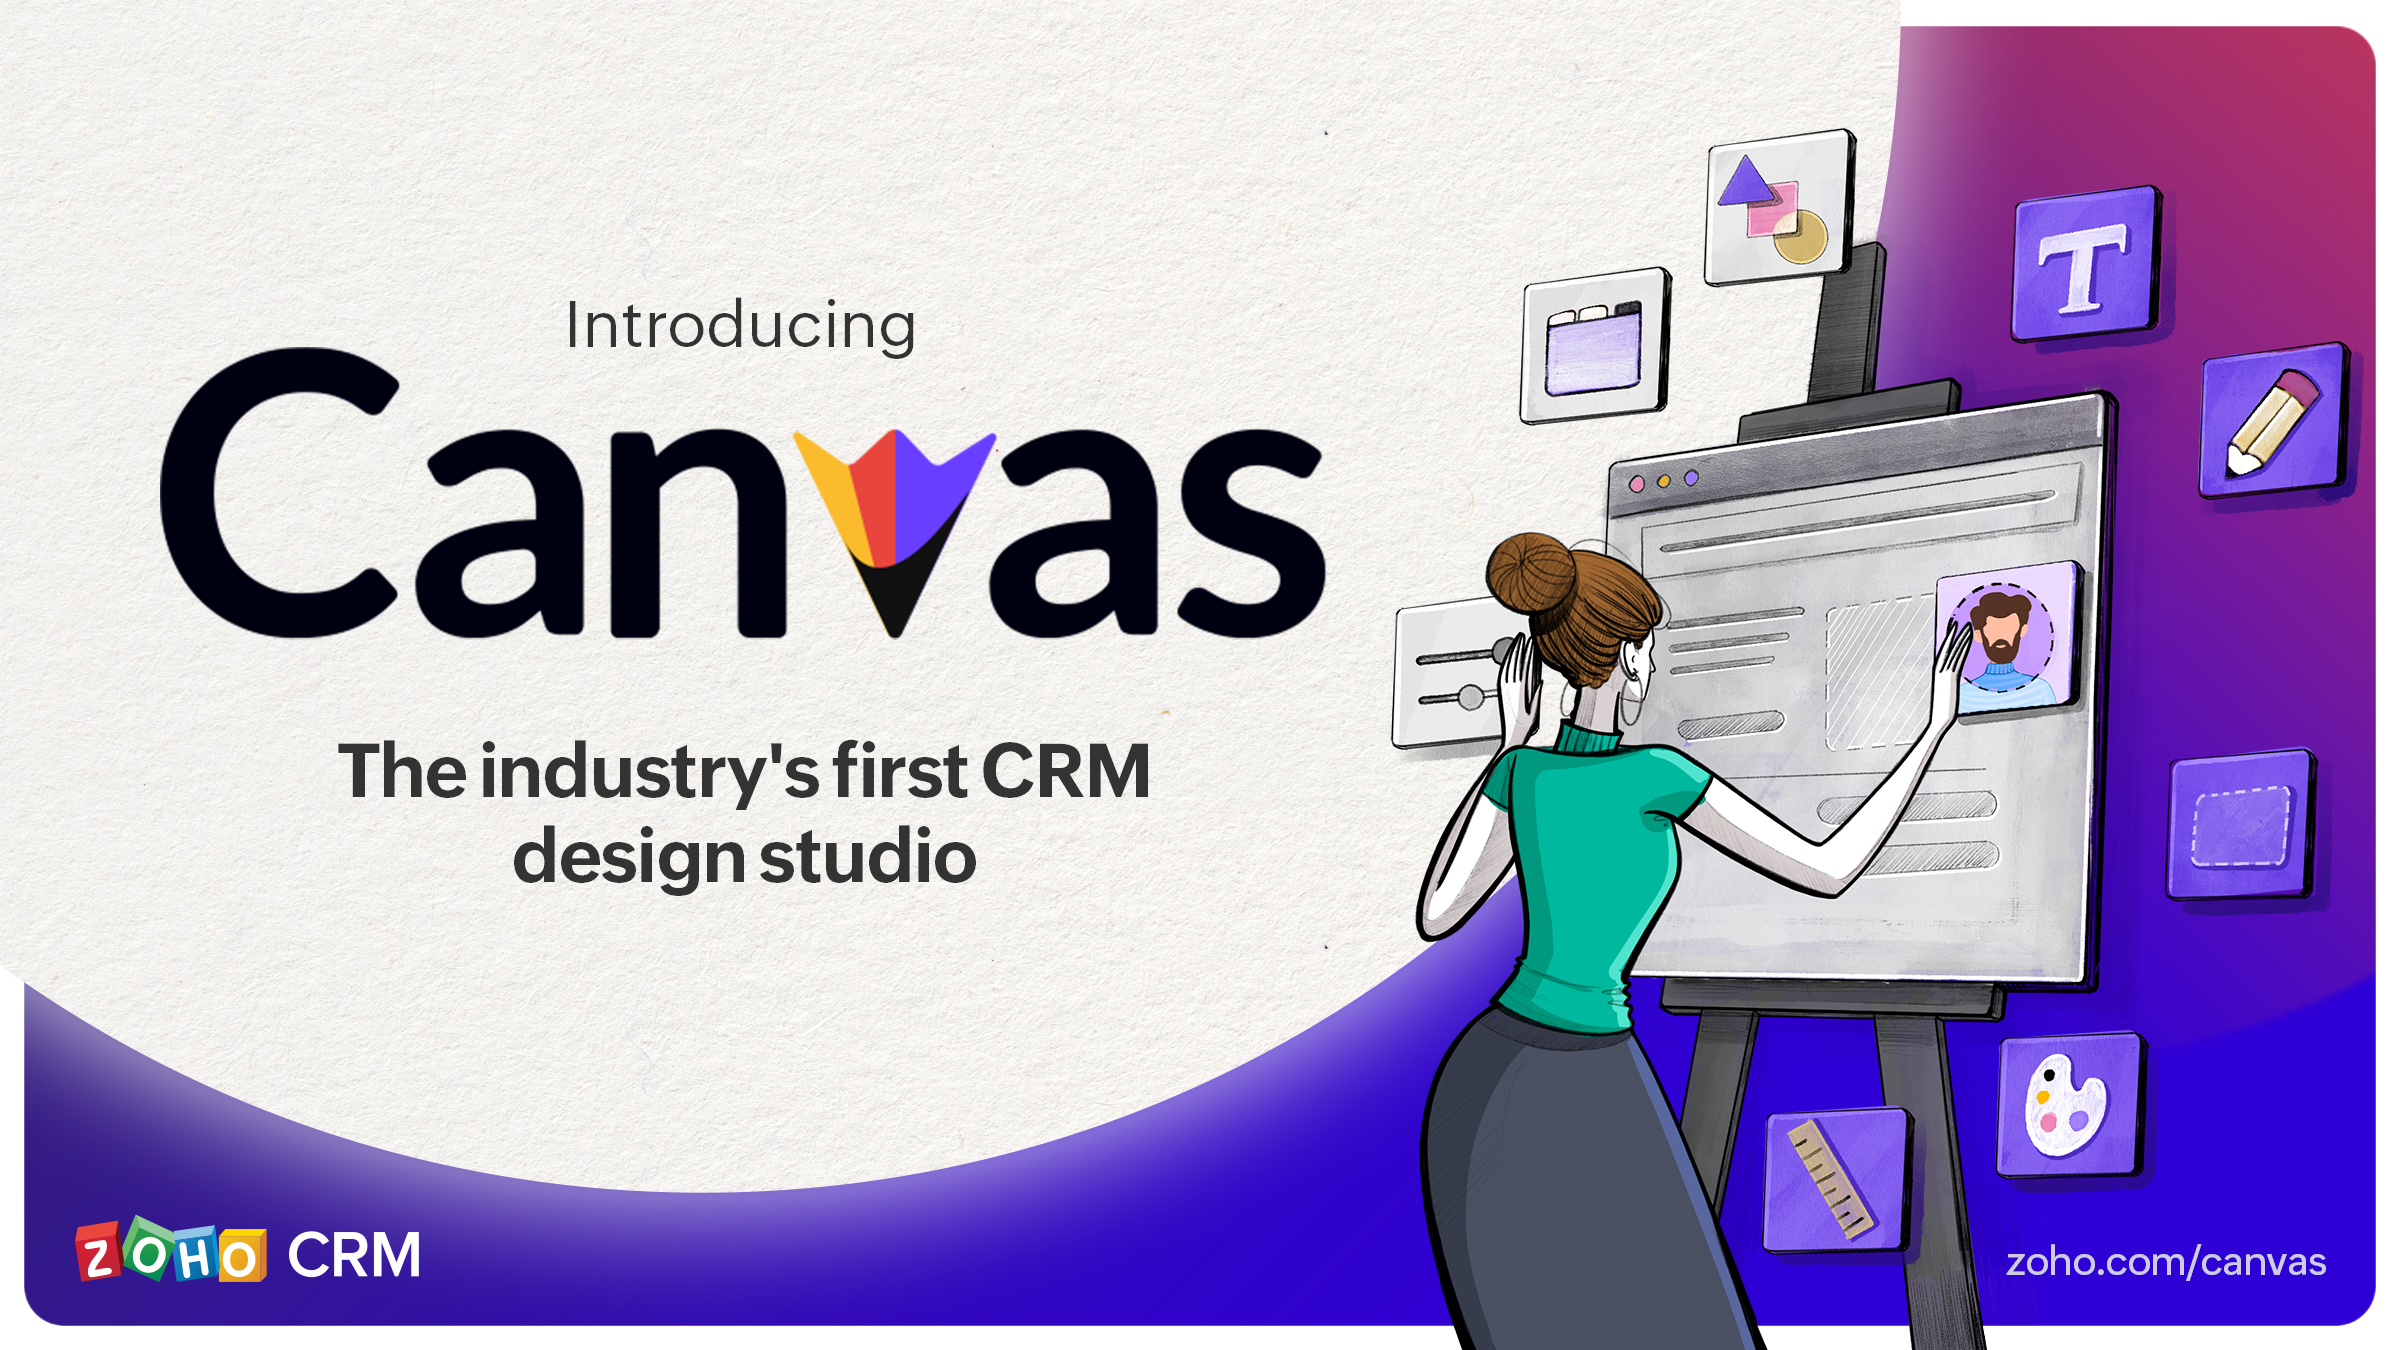 Introducing Canvas for Zoho CRM, the industry's first CRM design studio.